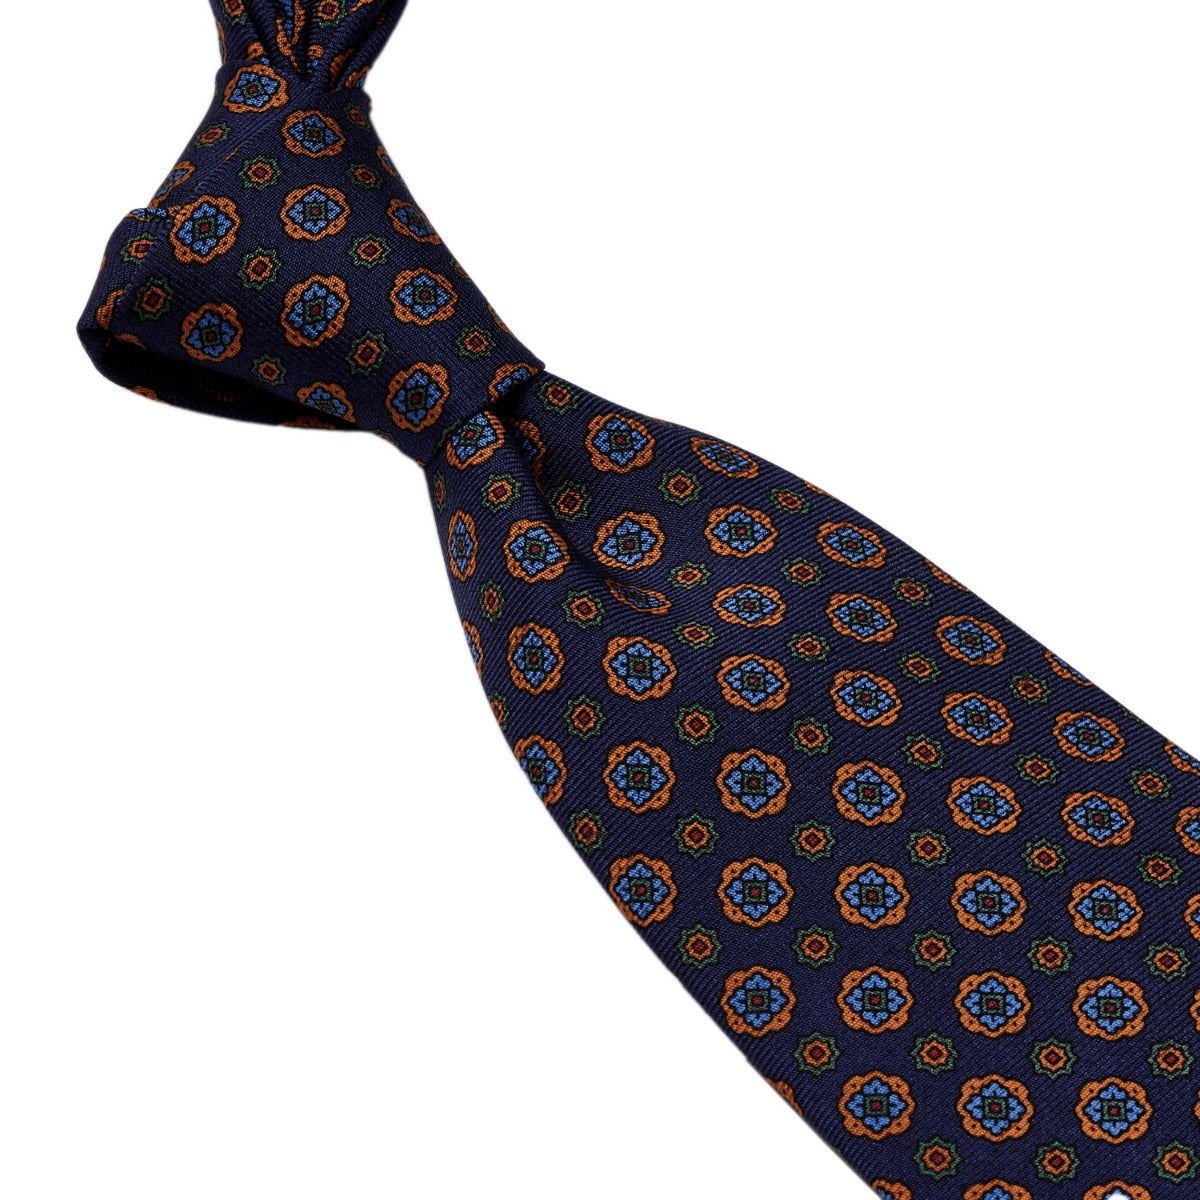 A Sovereign Grade Navy Geometric Floral 36oz Printed Silk Tie, from KirbyAllison.com, with an orange and blue pattern, showcasing quality craftsmanship from the United Kingdom.